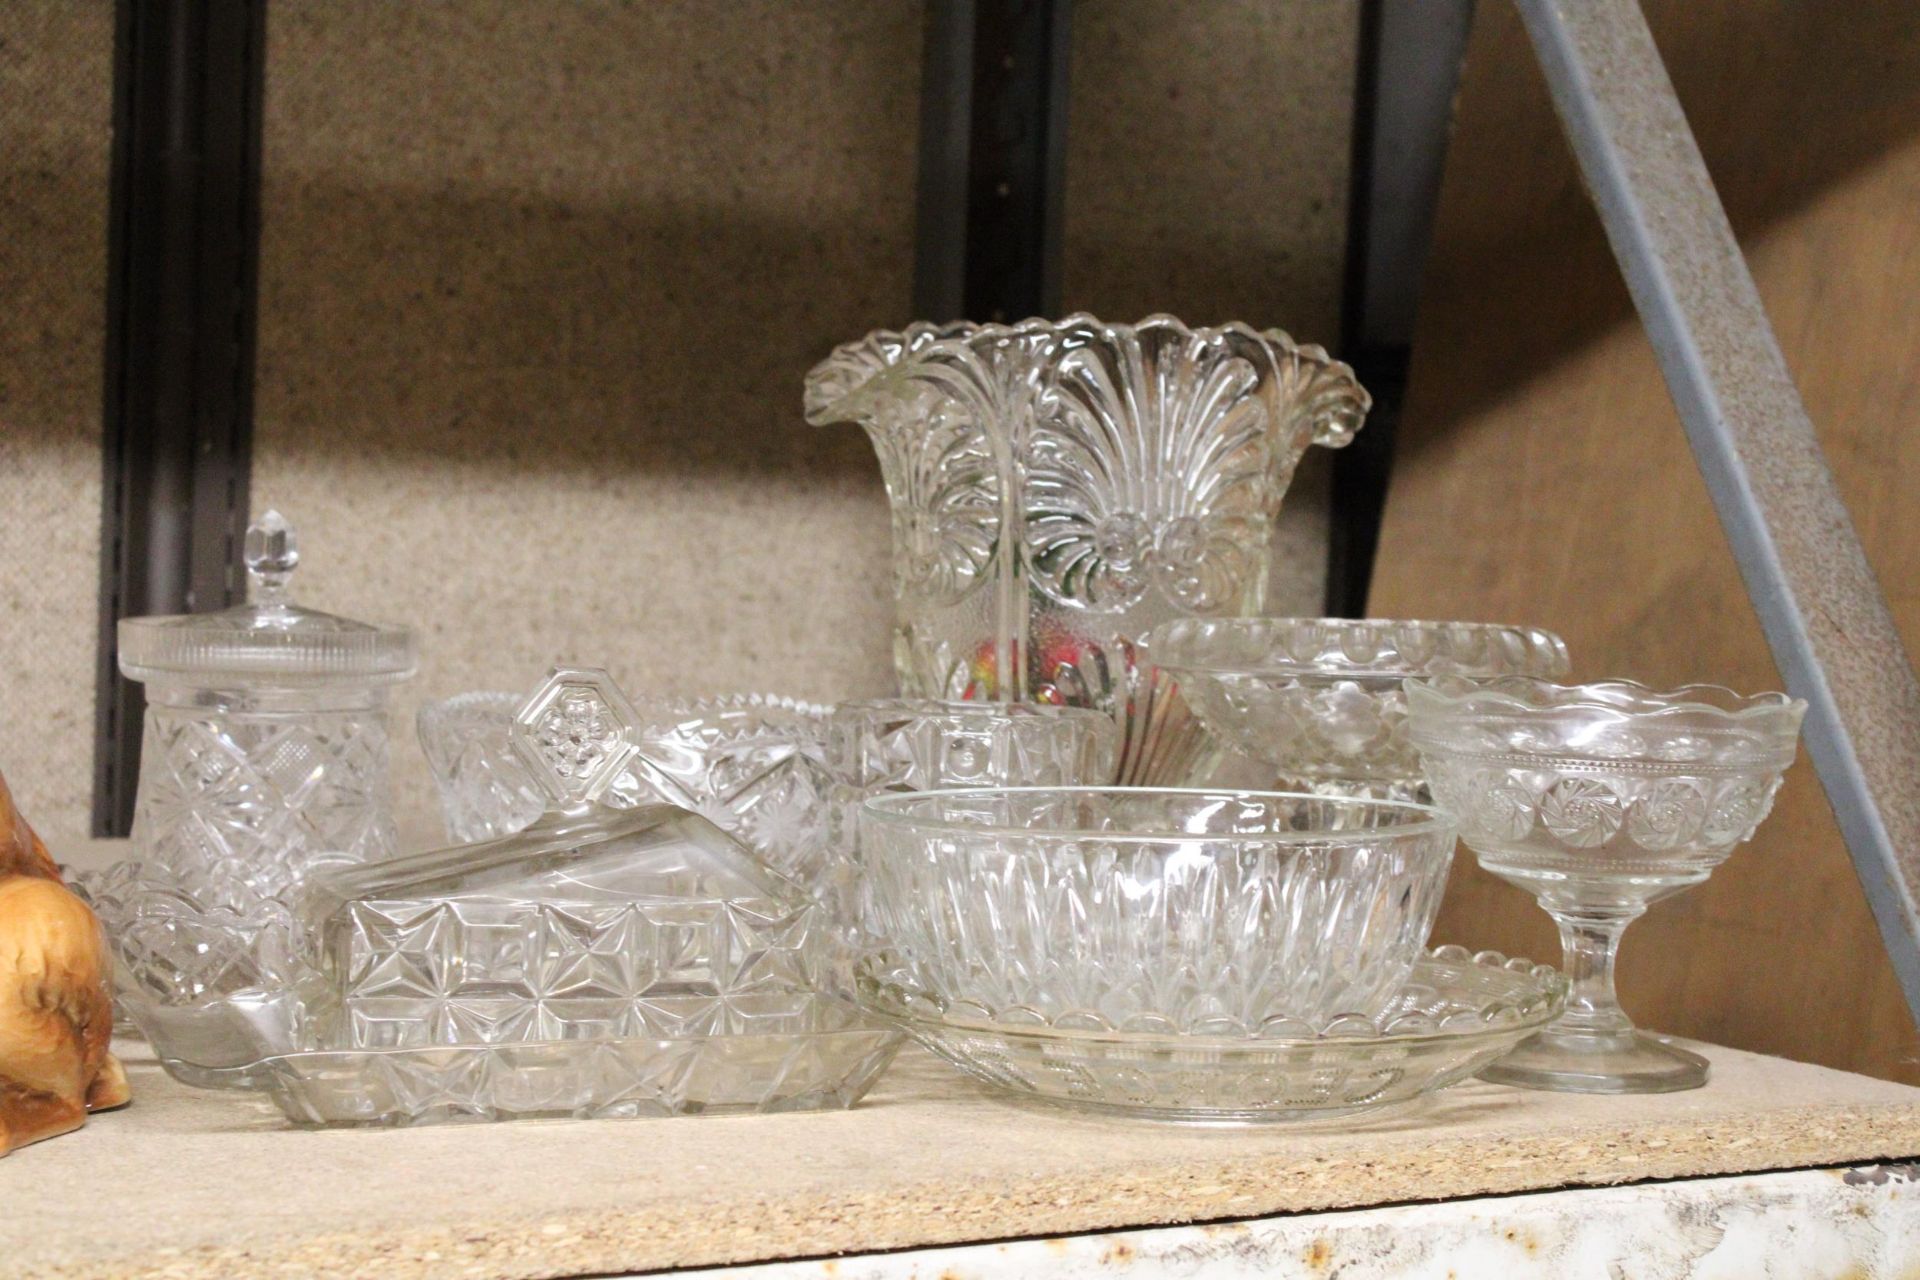 A QUANTITY OF GLASSWARE TO INCLUDE A LARGE VASE, BOWLS, FOOTED BOWLS, A CHEESE DISH, ETC